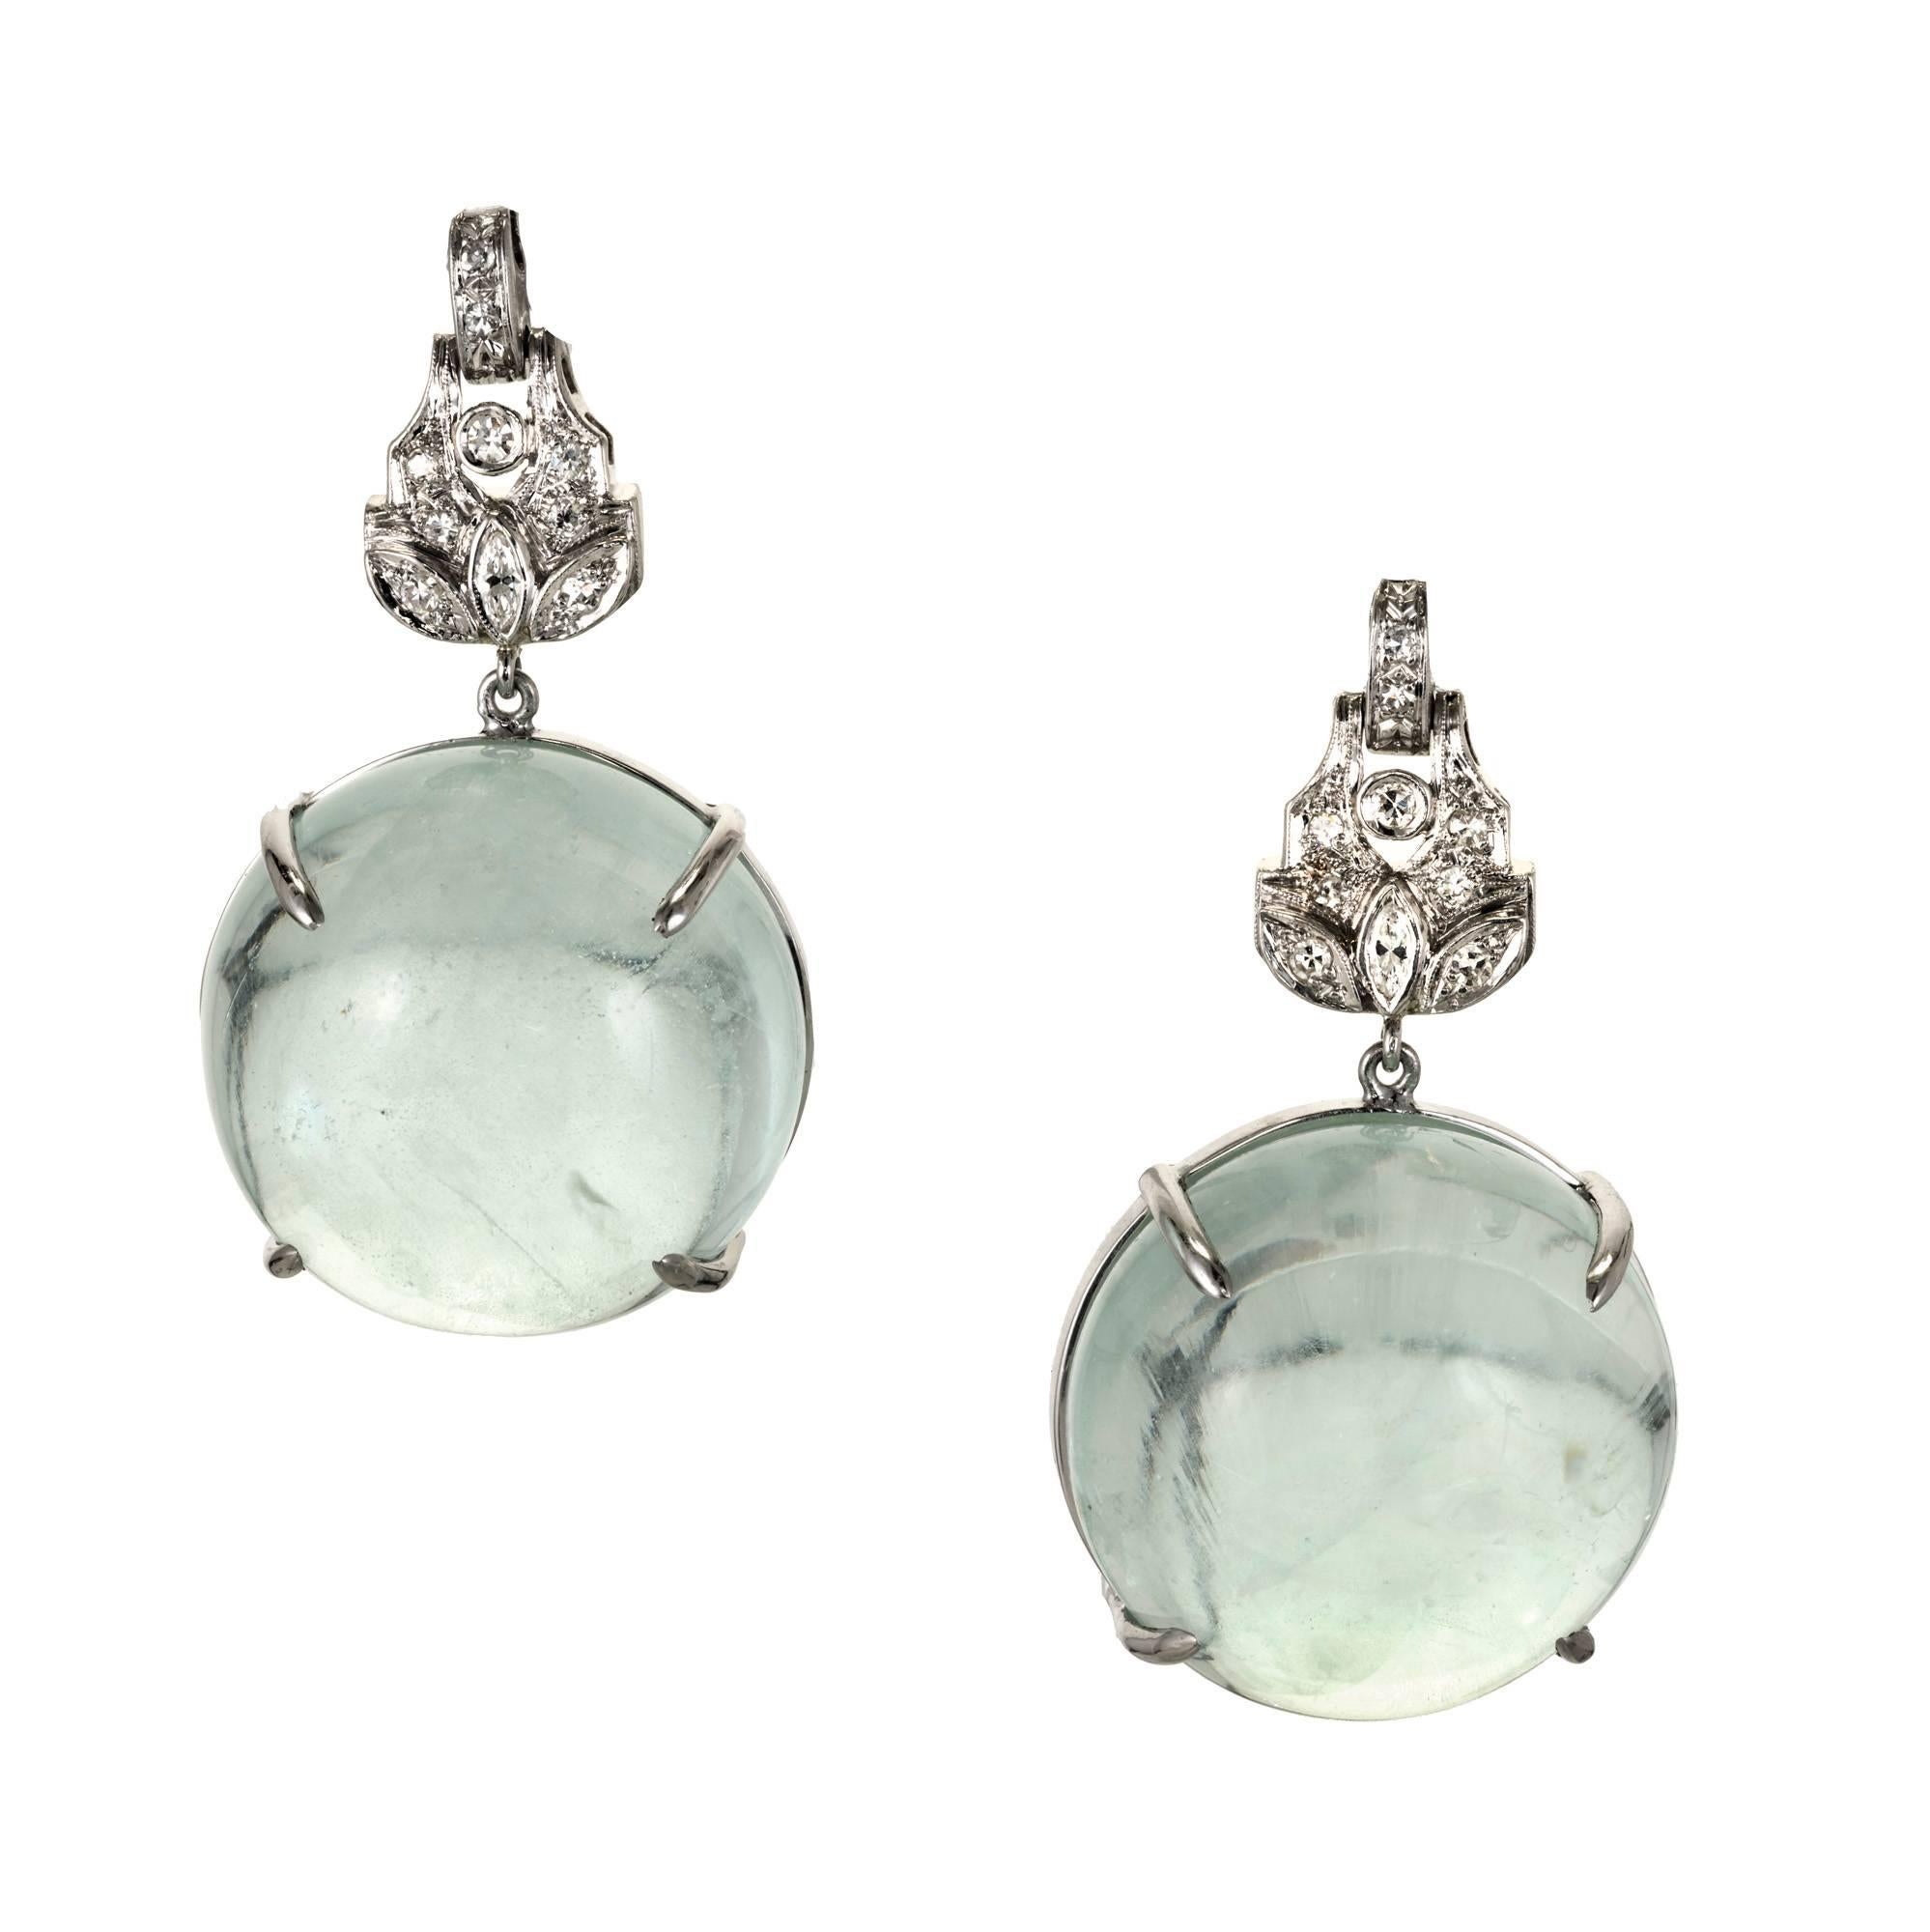 Peter Suchy Aqua and diamond Platinum dangle earrings. Platinum tops are hand beaded and bezel set with old cut Diamonds. In the bottom of each is a natural untreated large round Aqua cabochon dangle with unusual rainbow inclusions.

2 round